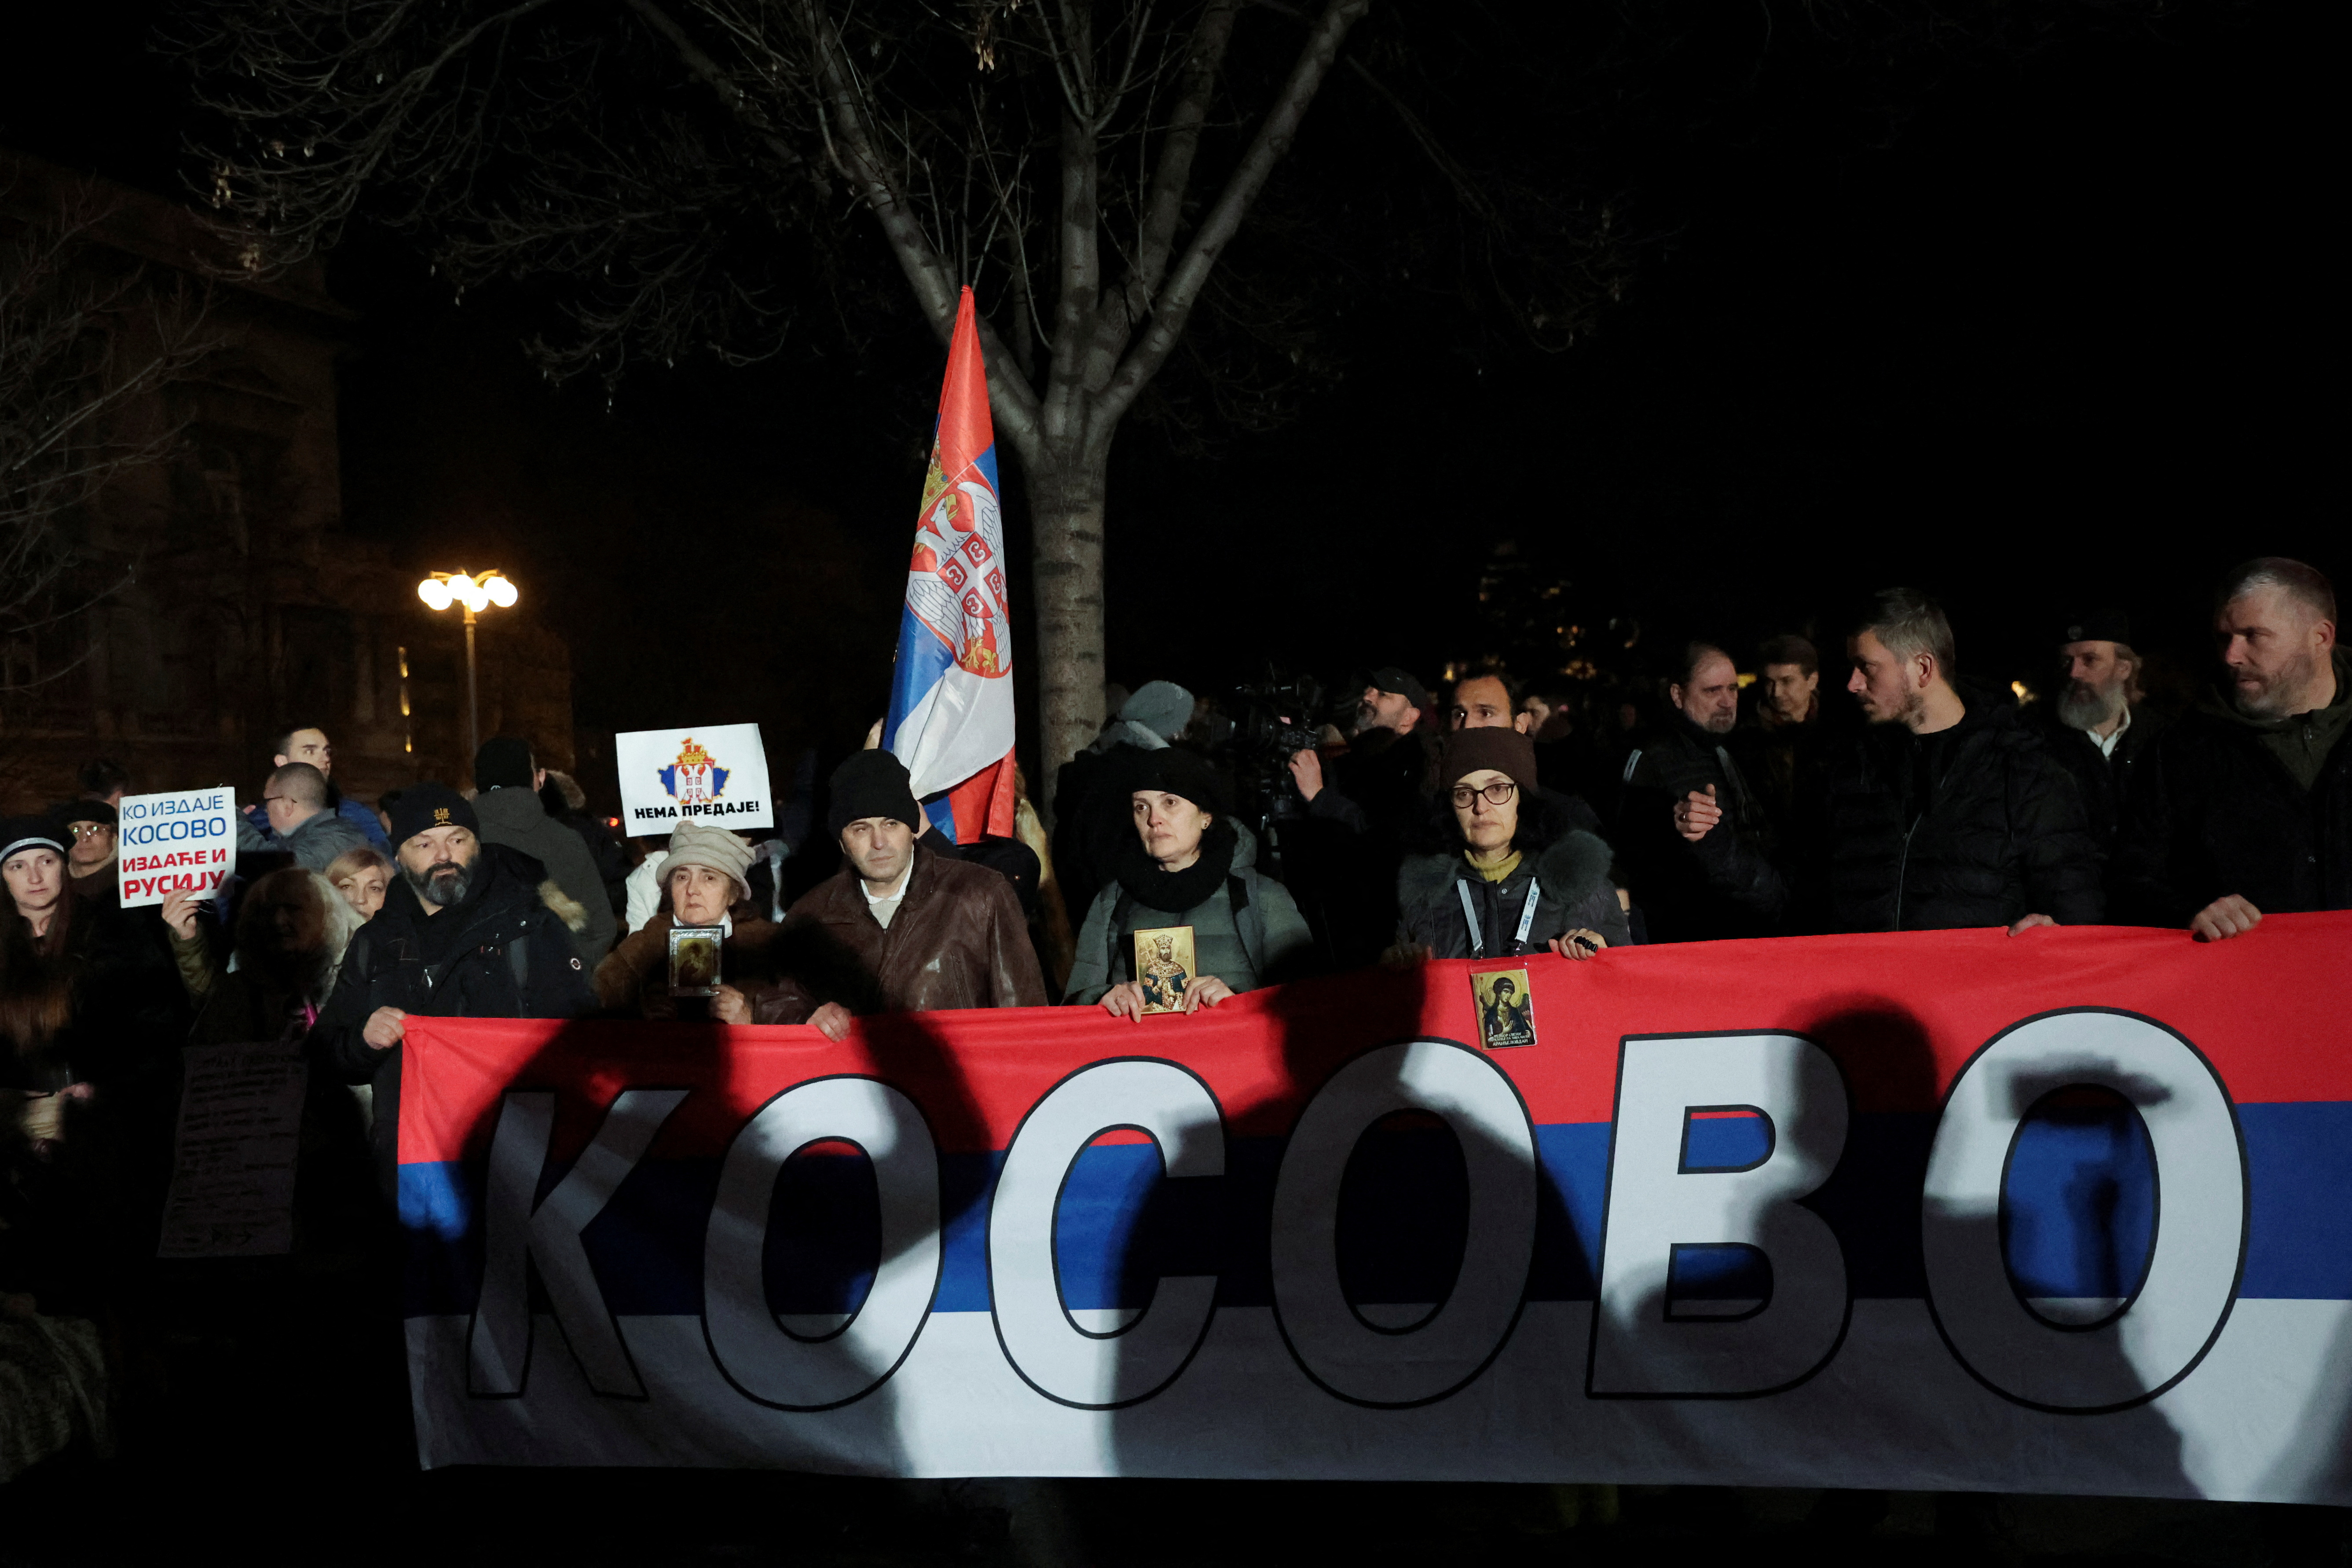 People hold a Serbian flag reading "Kosovo" during a protest against the Serbian authorities and French-German plan for the resolution of Kosovo